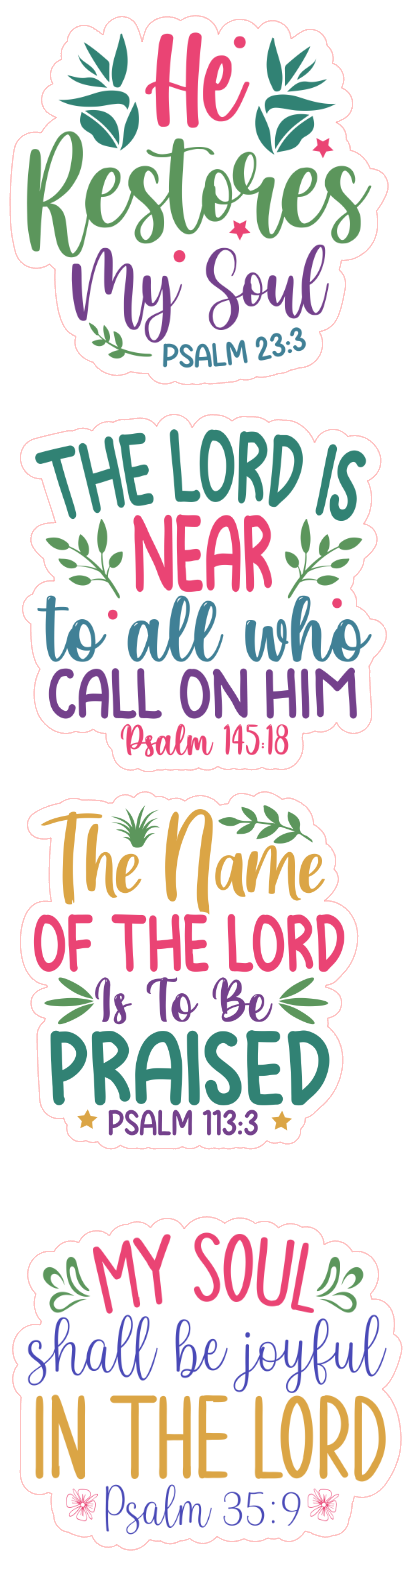 Bible verse quotes stickers